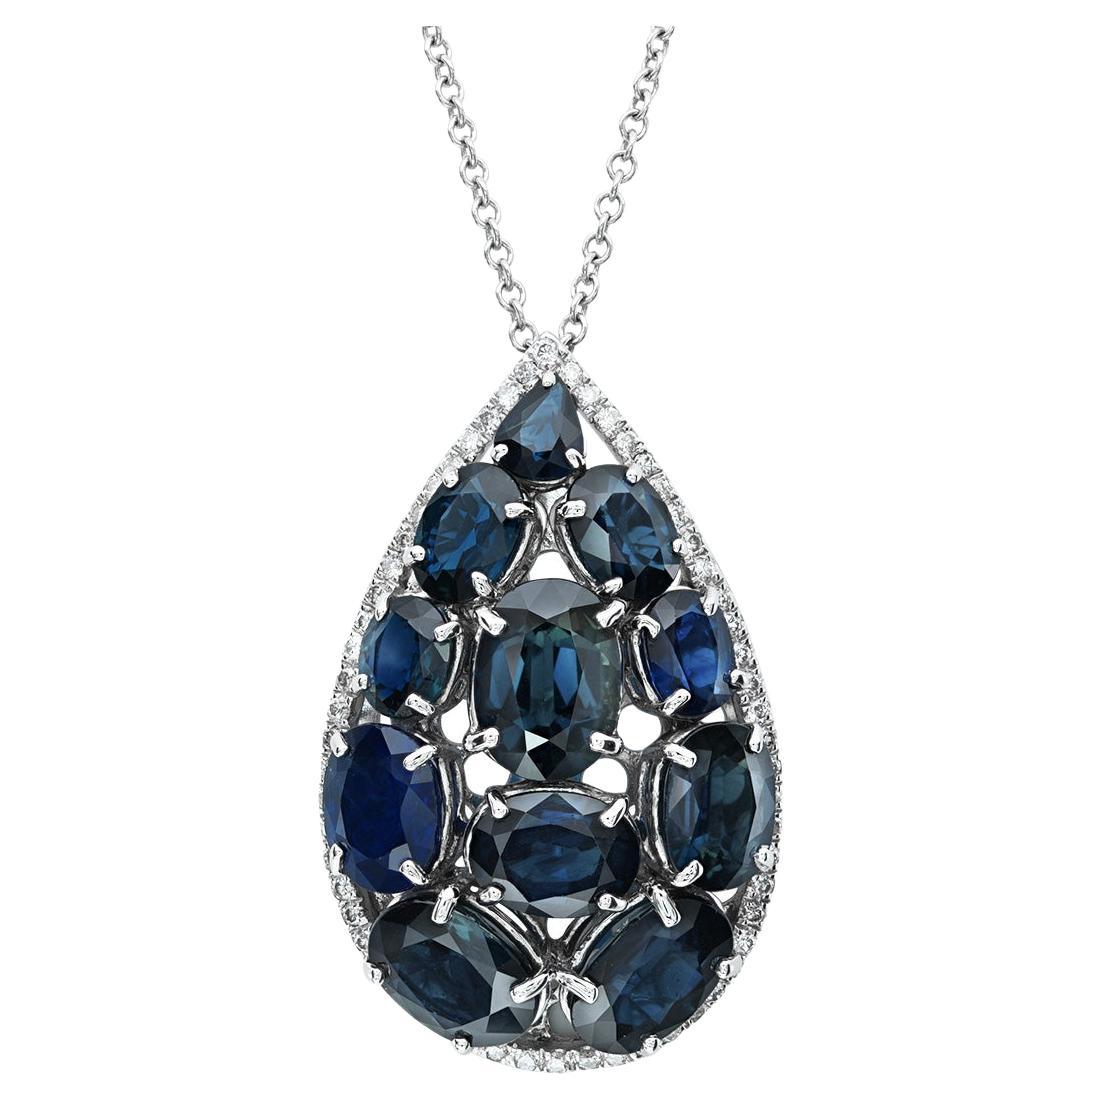 16.50Ct Natural Blue Sapphires Diamond 18K White Gold Necklace, Jewelry Sapphire